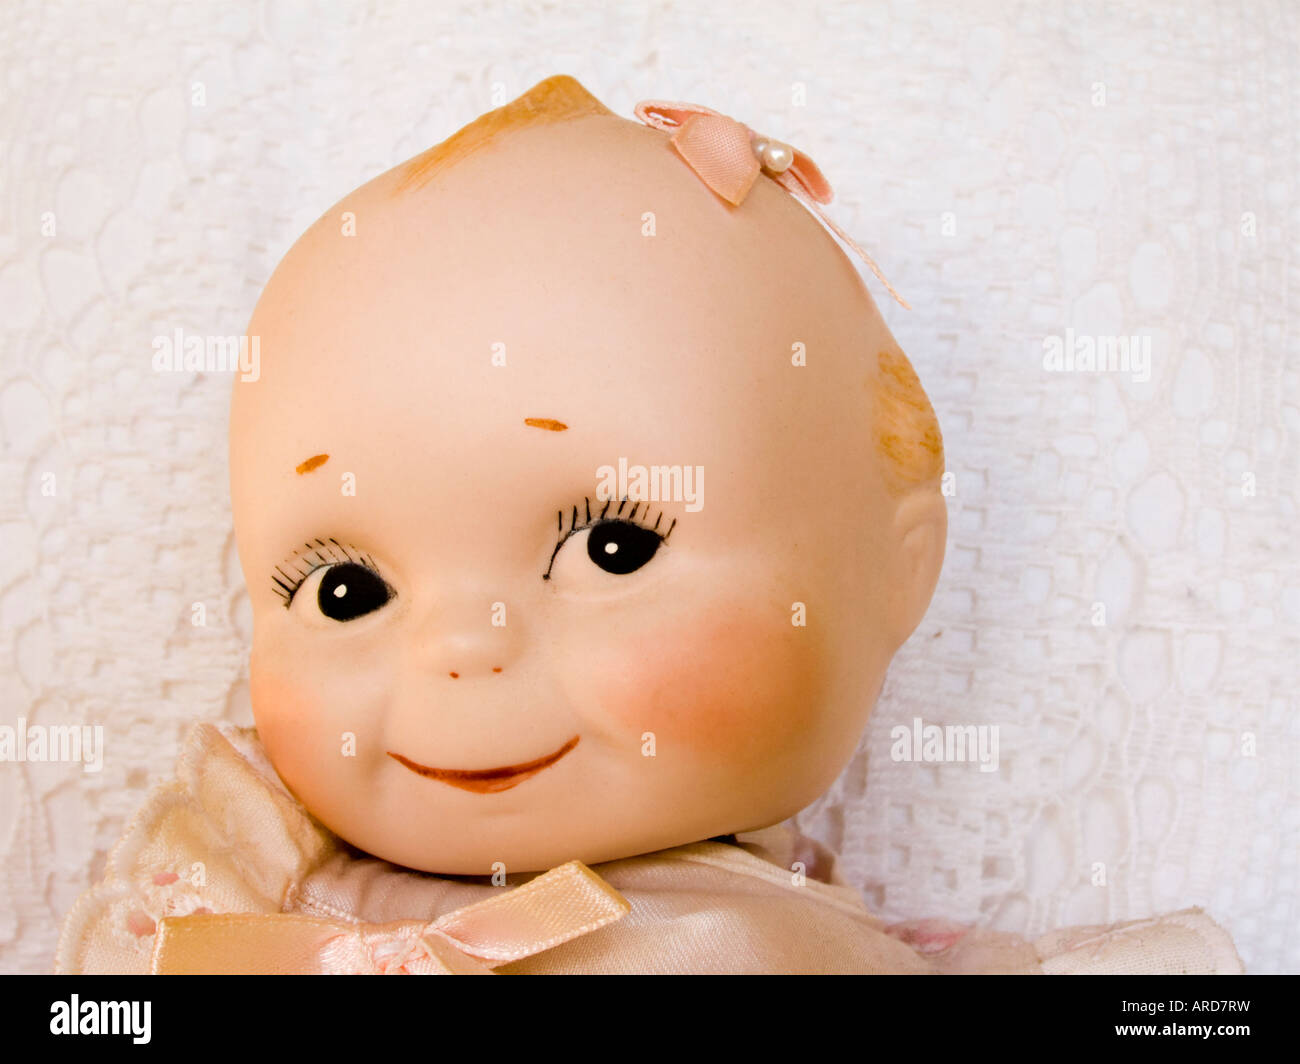 Adorable Baby Doll Banque D'Images